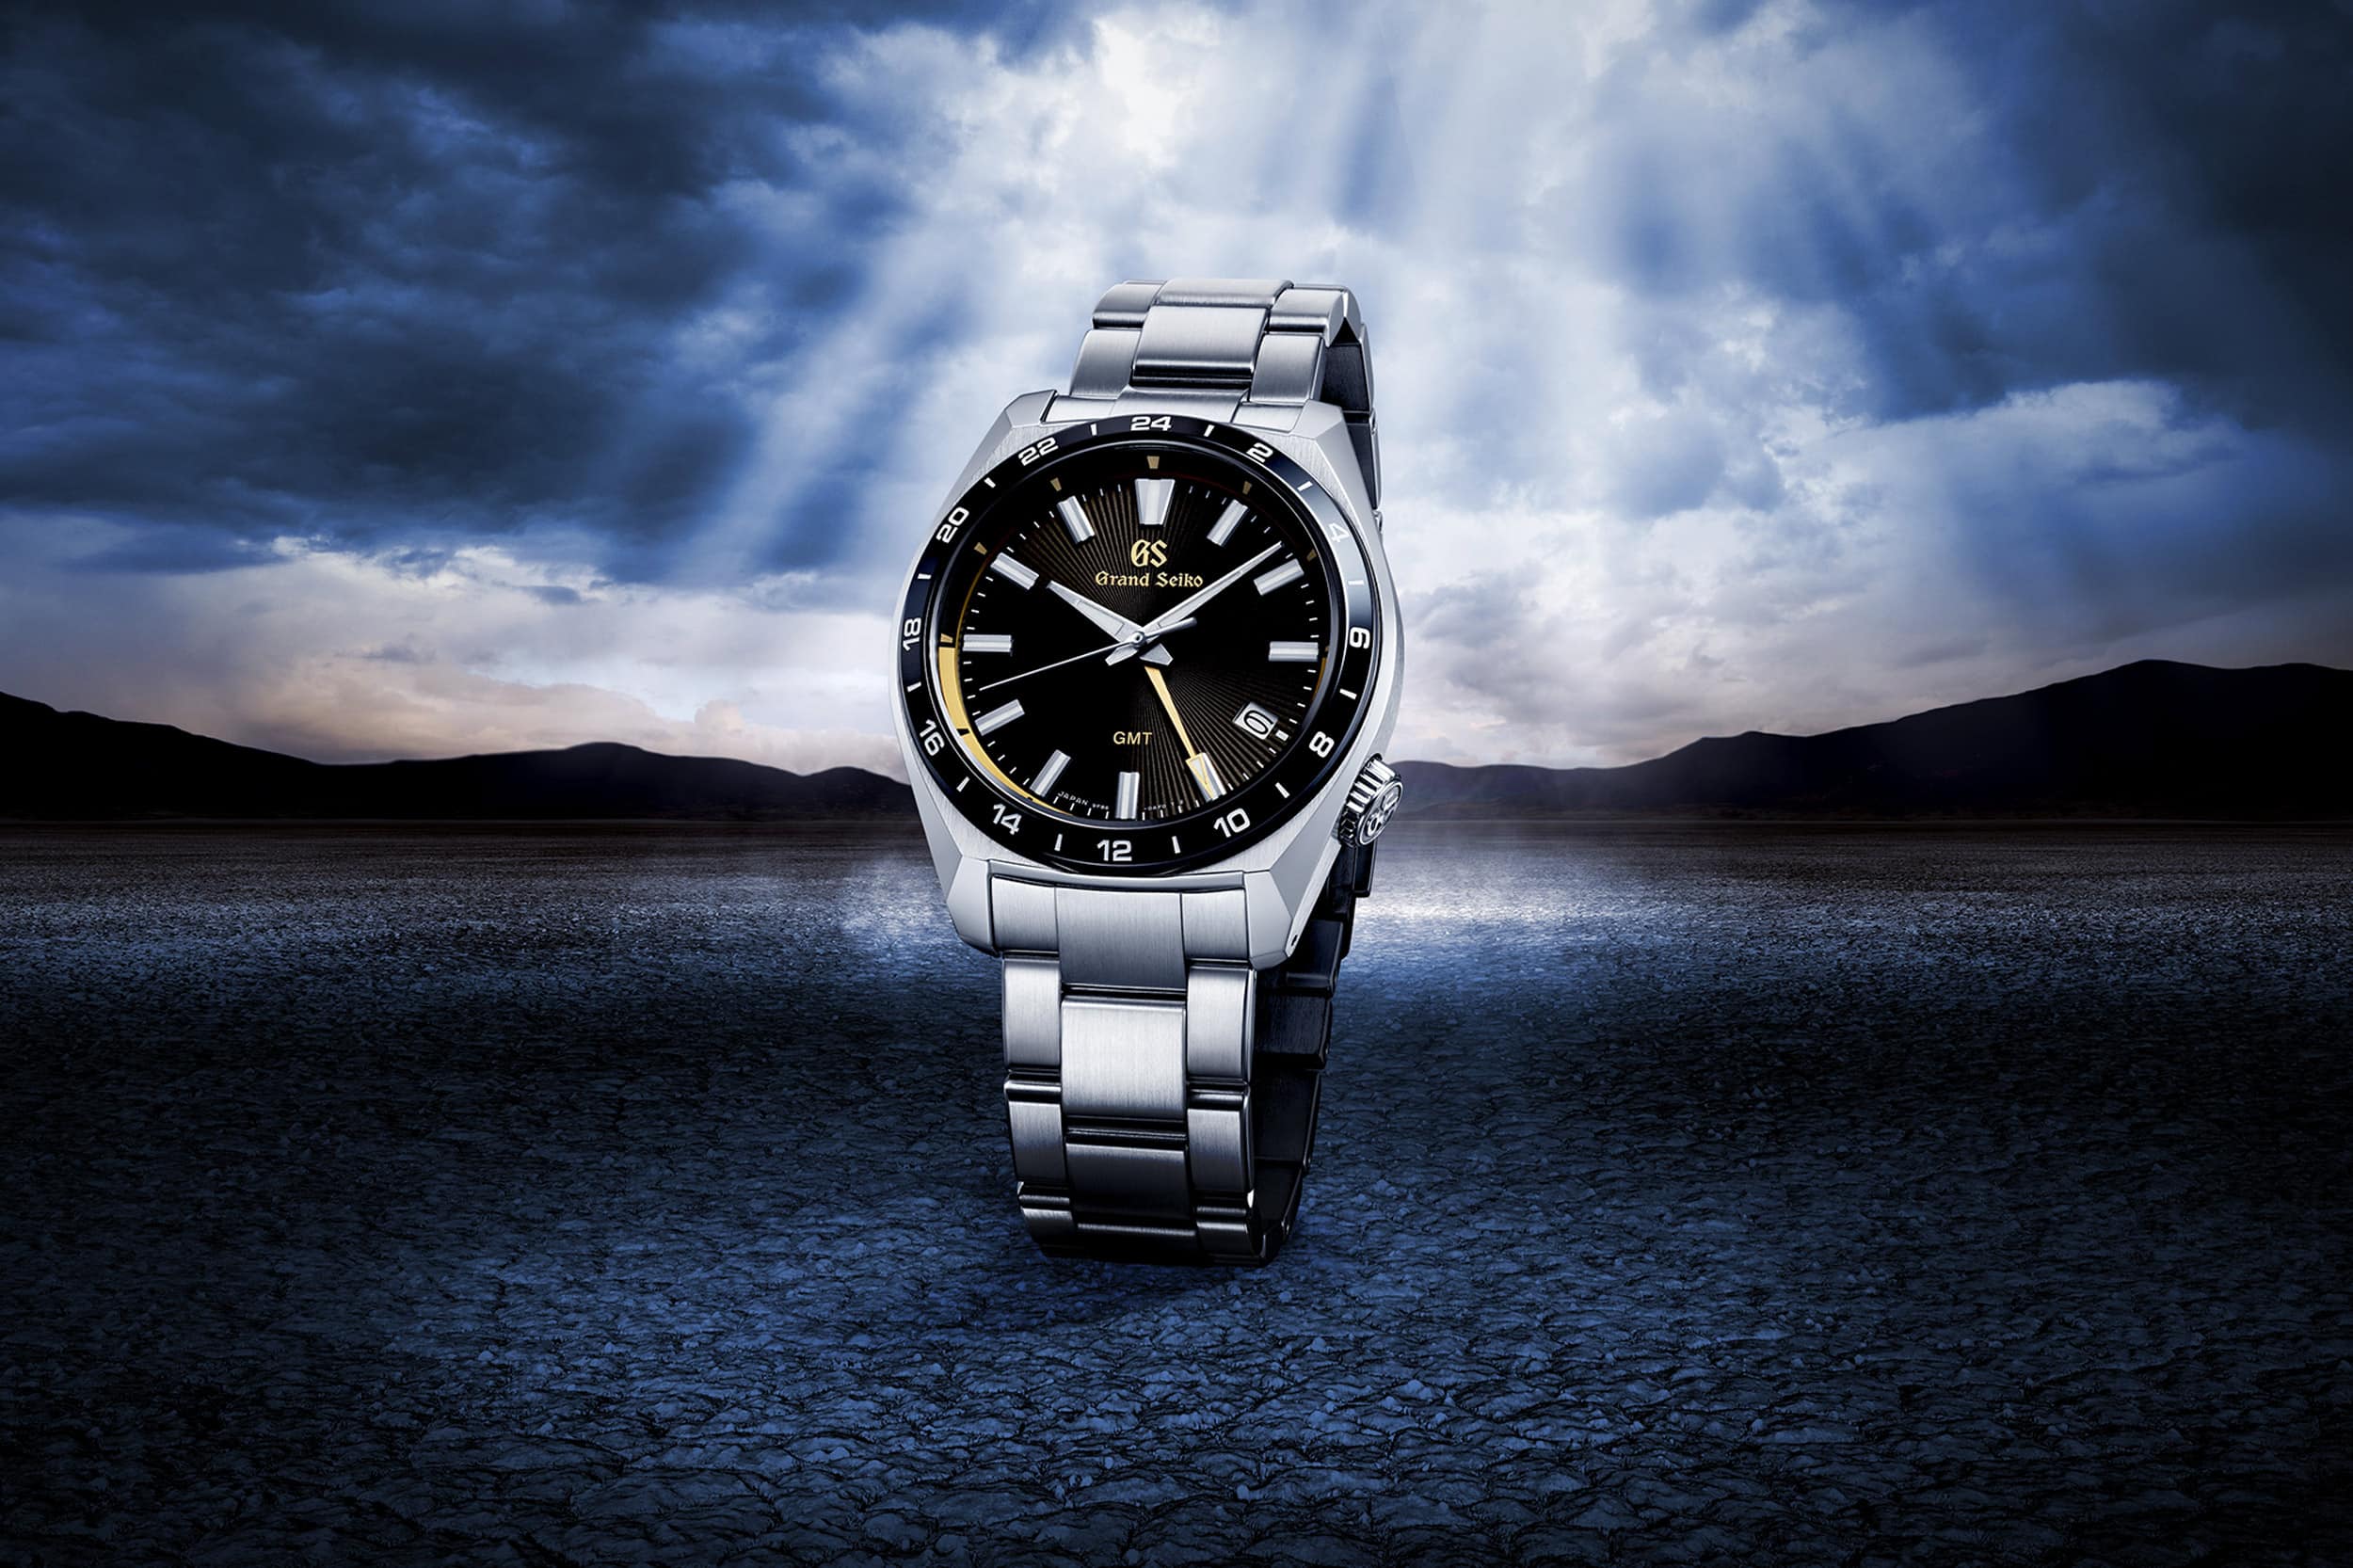 Grand Seiko Introduces Three New 9F Powered GMTs - Worn & Wound